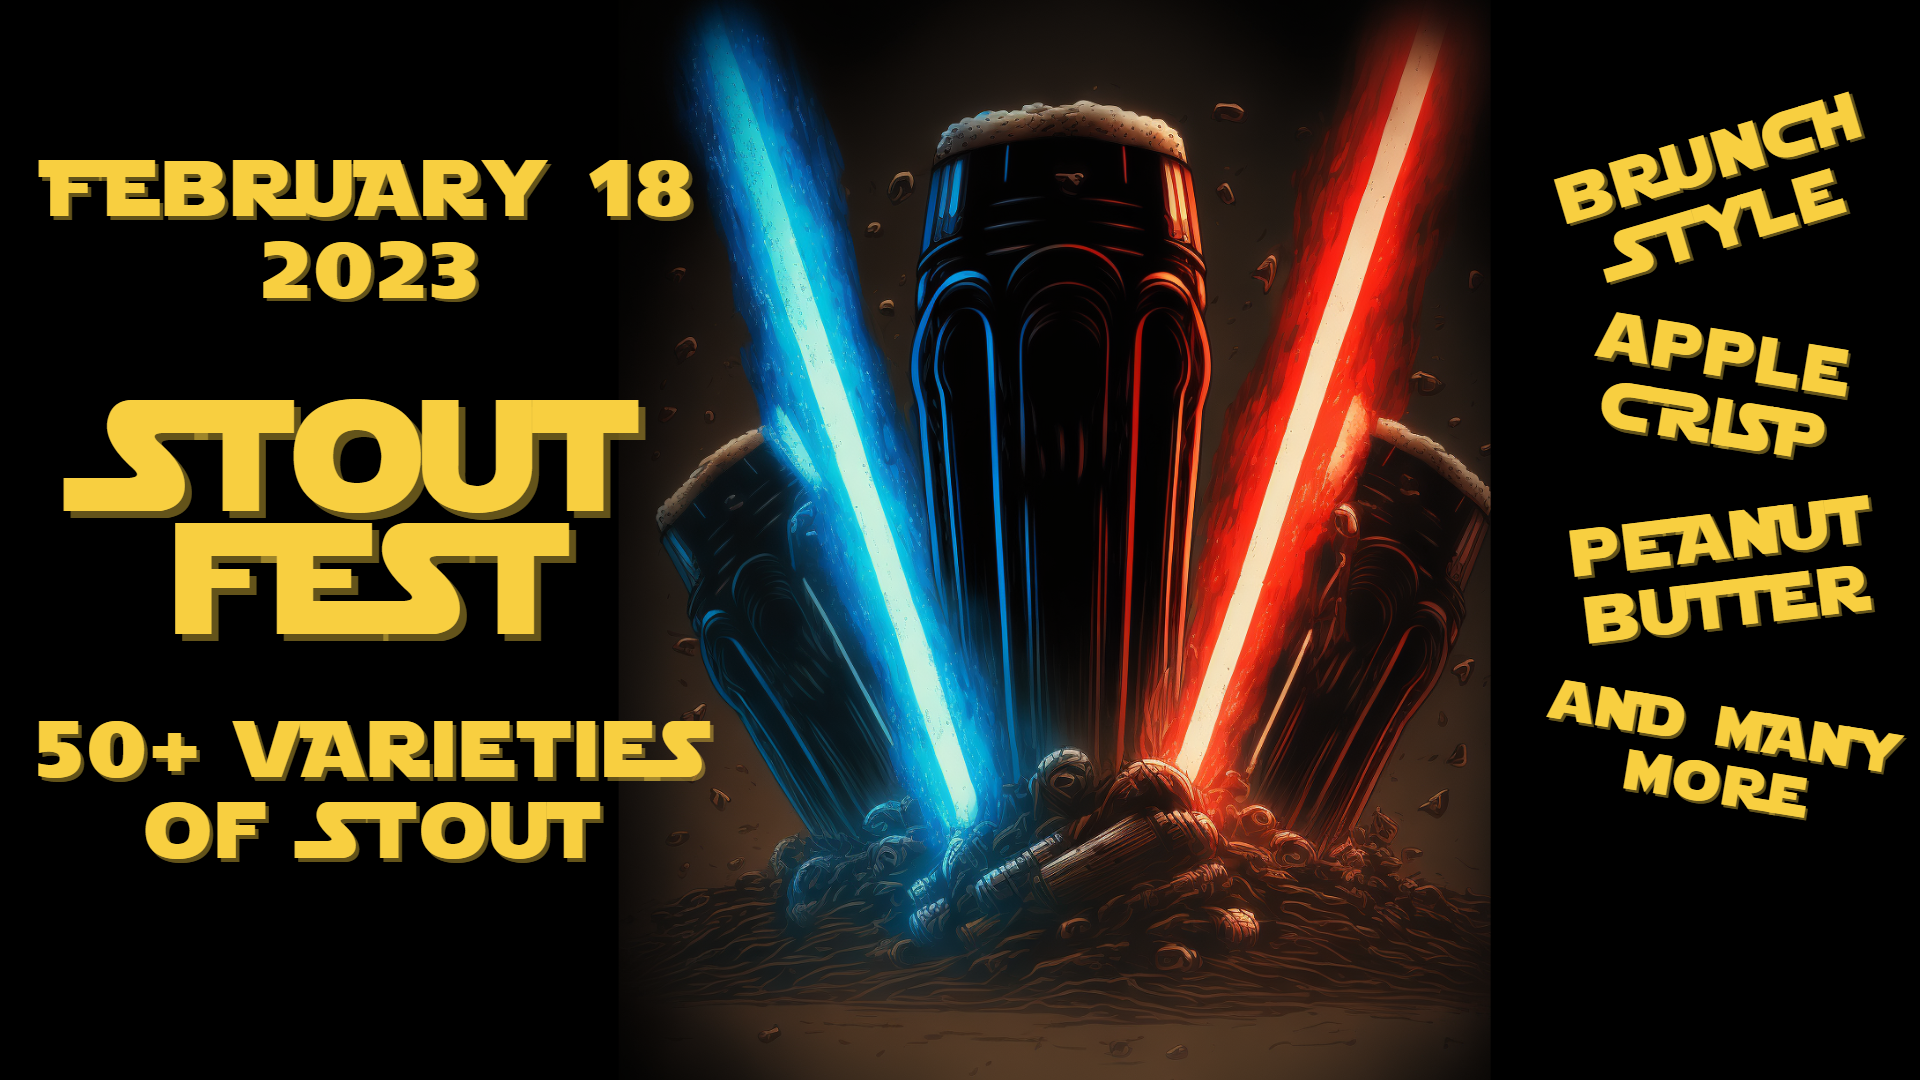 Stoutfest at Czig Meister Brewing Company on Feb 18, 2023 featuring over 50 varieties of stout